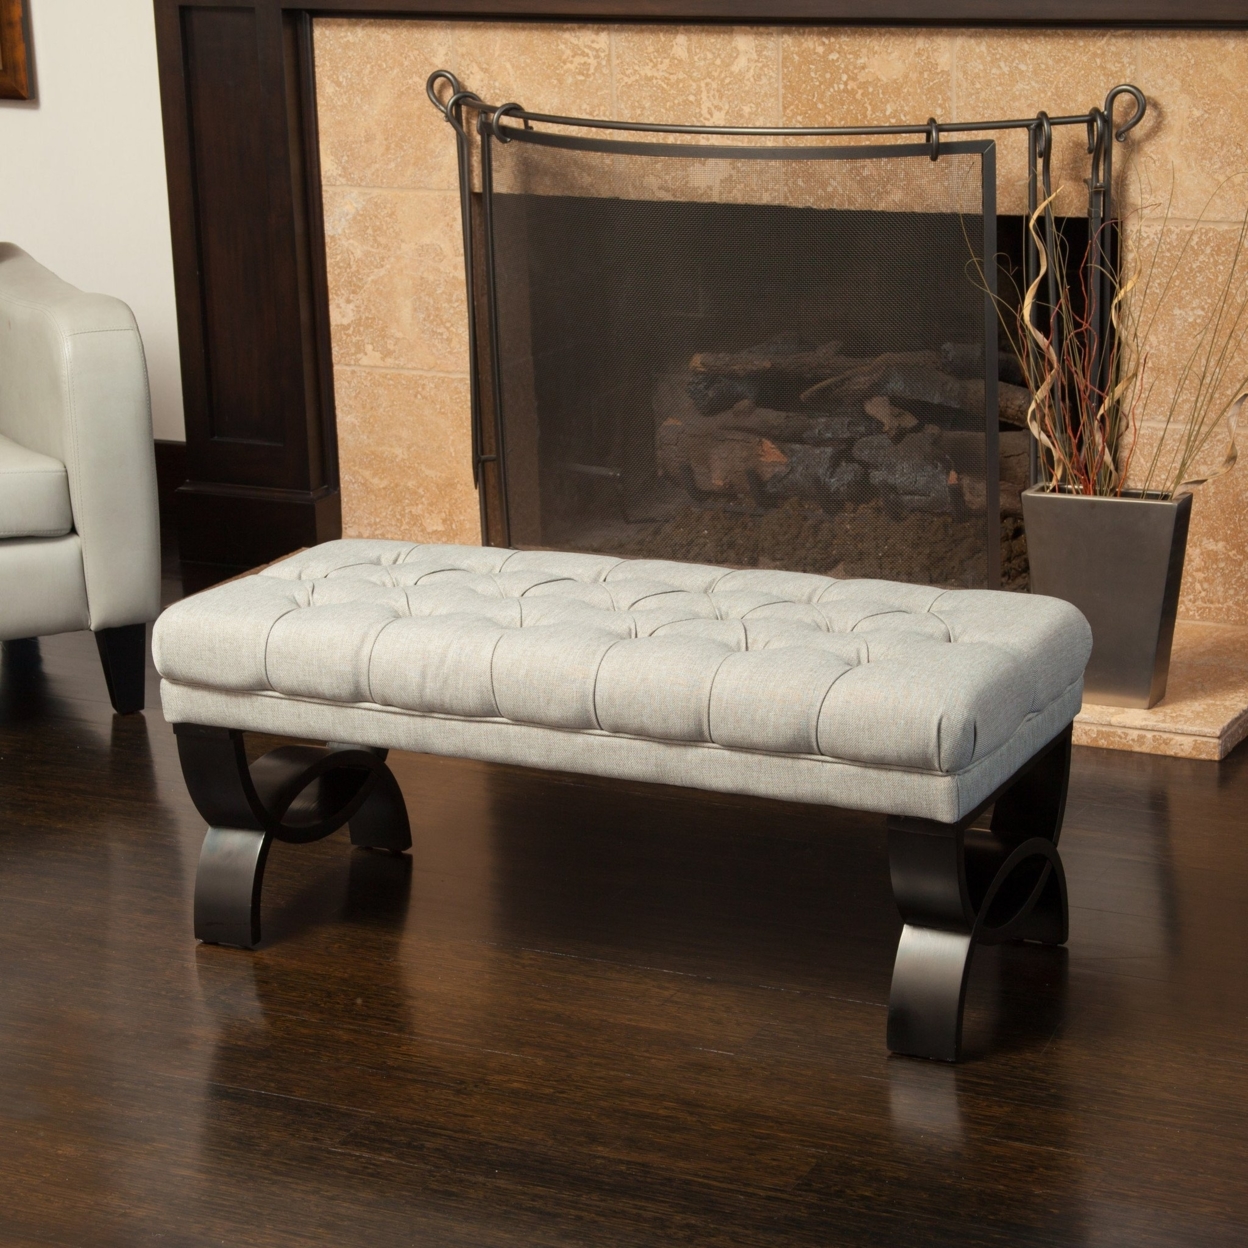 Colette Tufted Sand Fabric Ottoman Bench